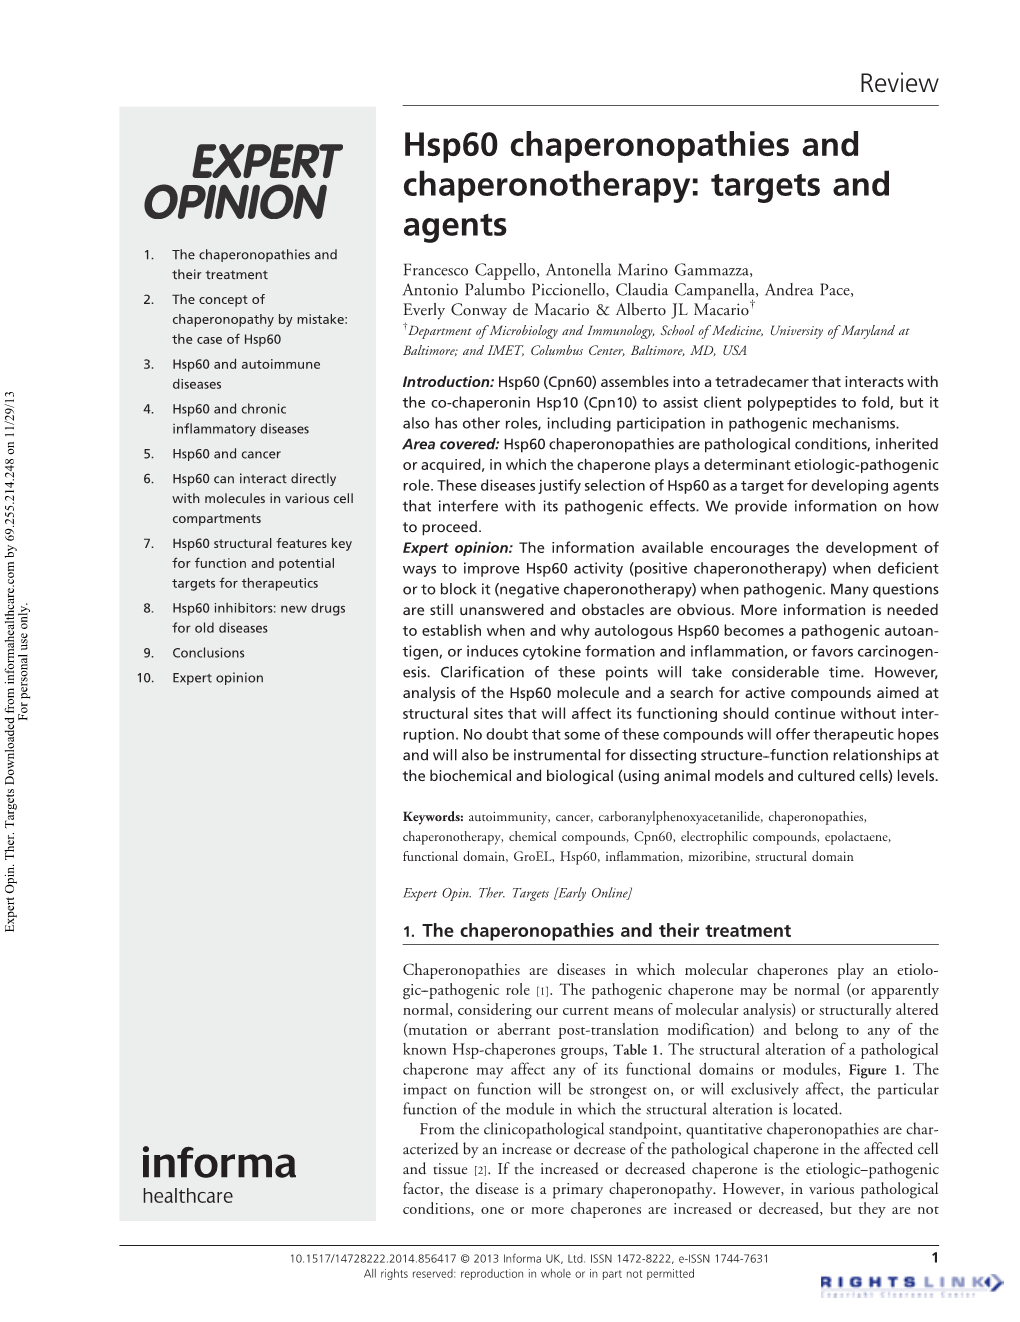 Hsp60 Chaperonopathies and Chaperonotherapy: Targets and Agents 1